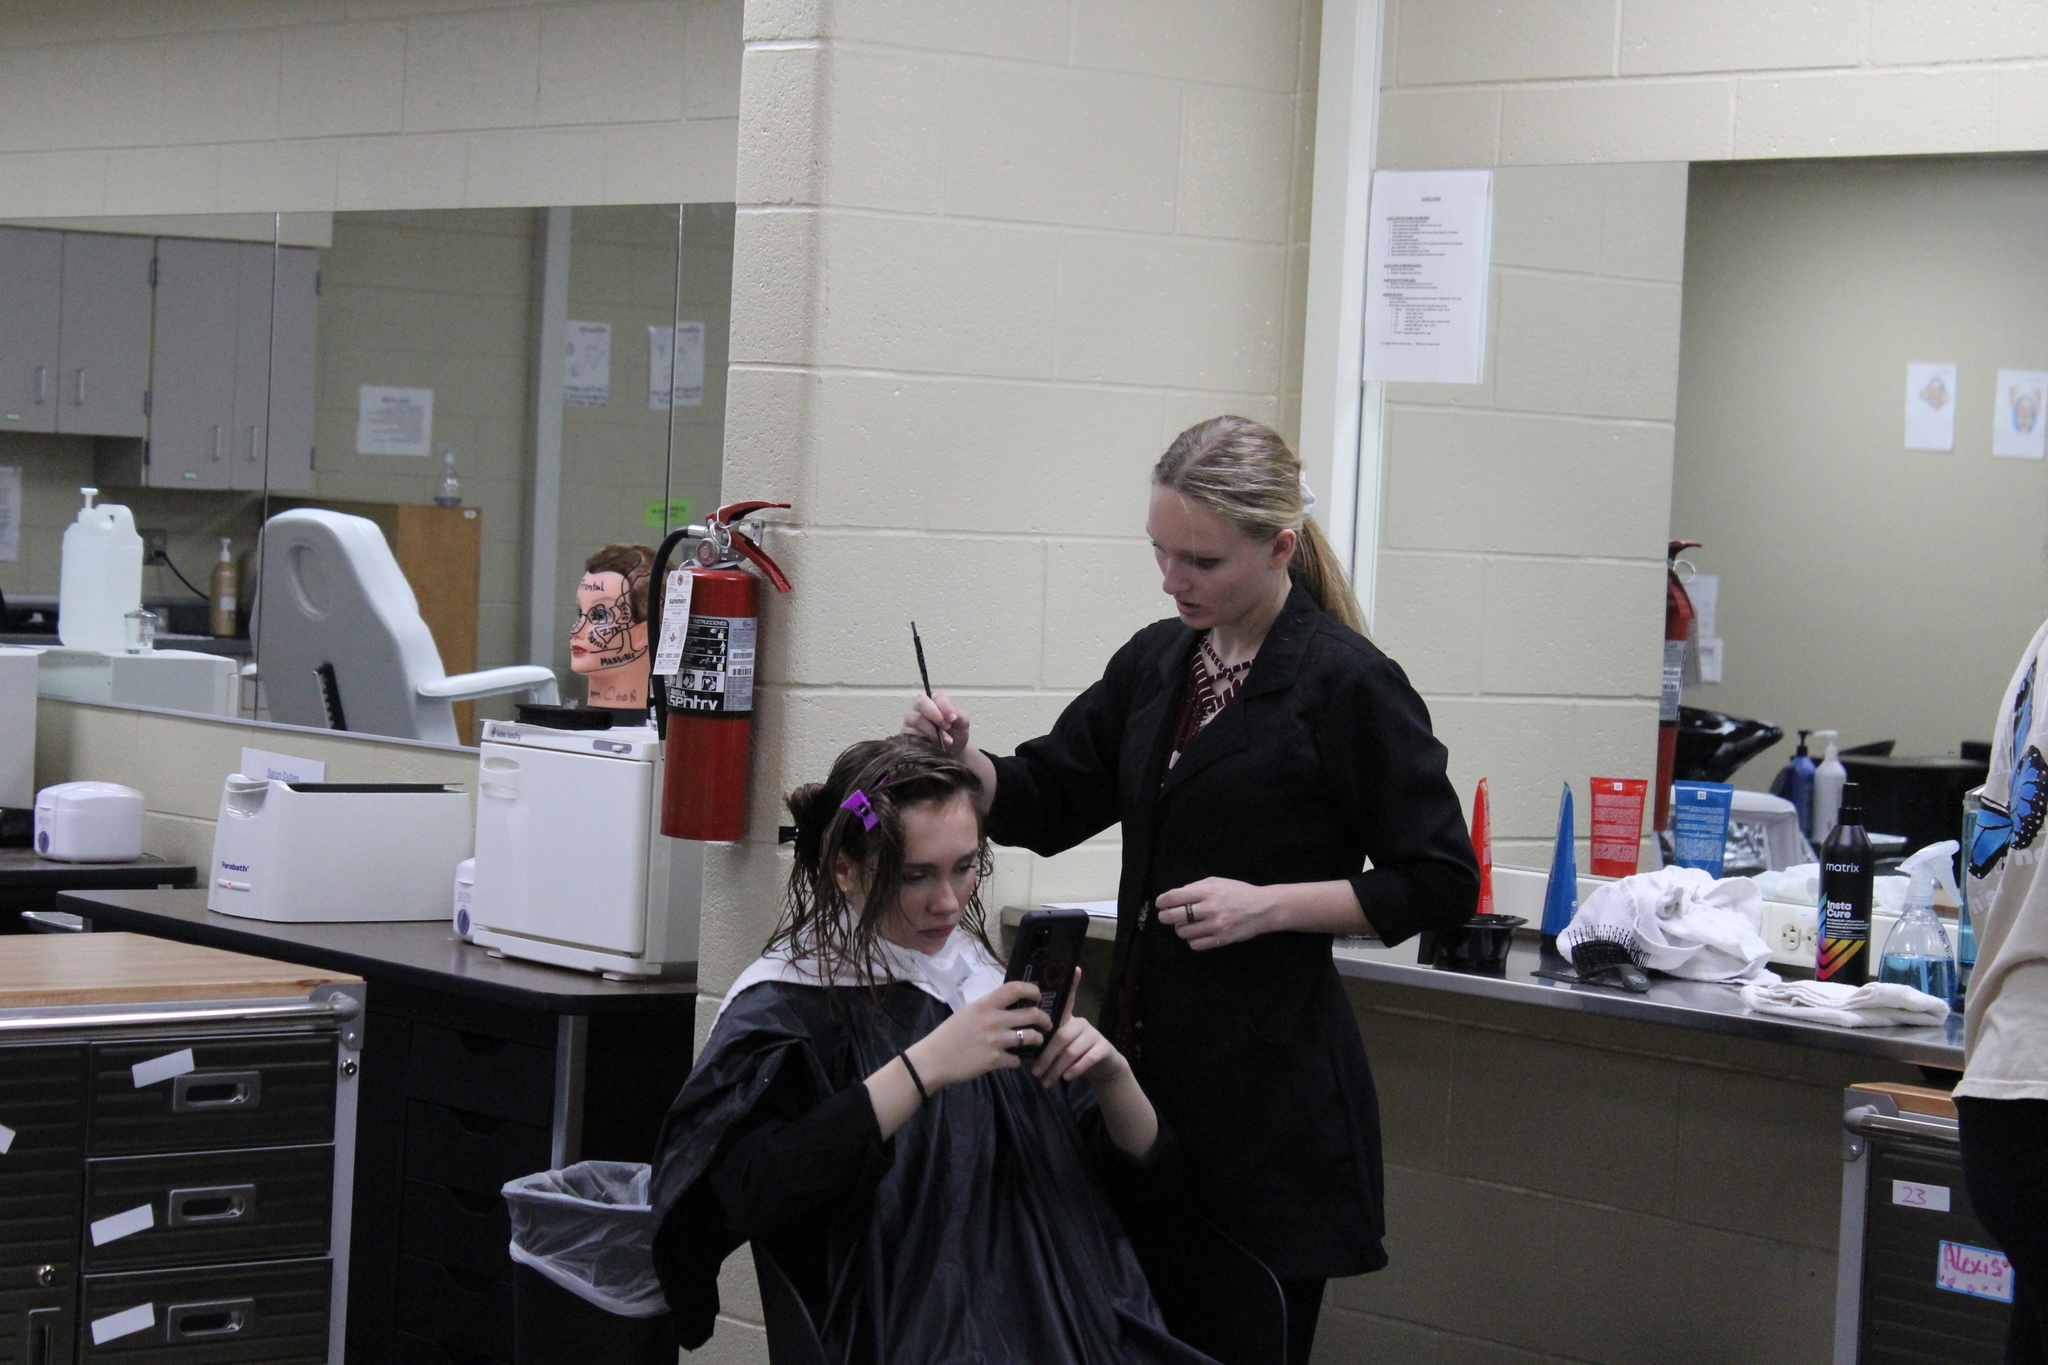 Cosmetology students